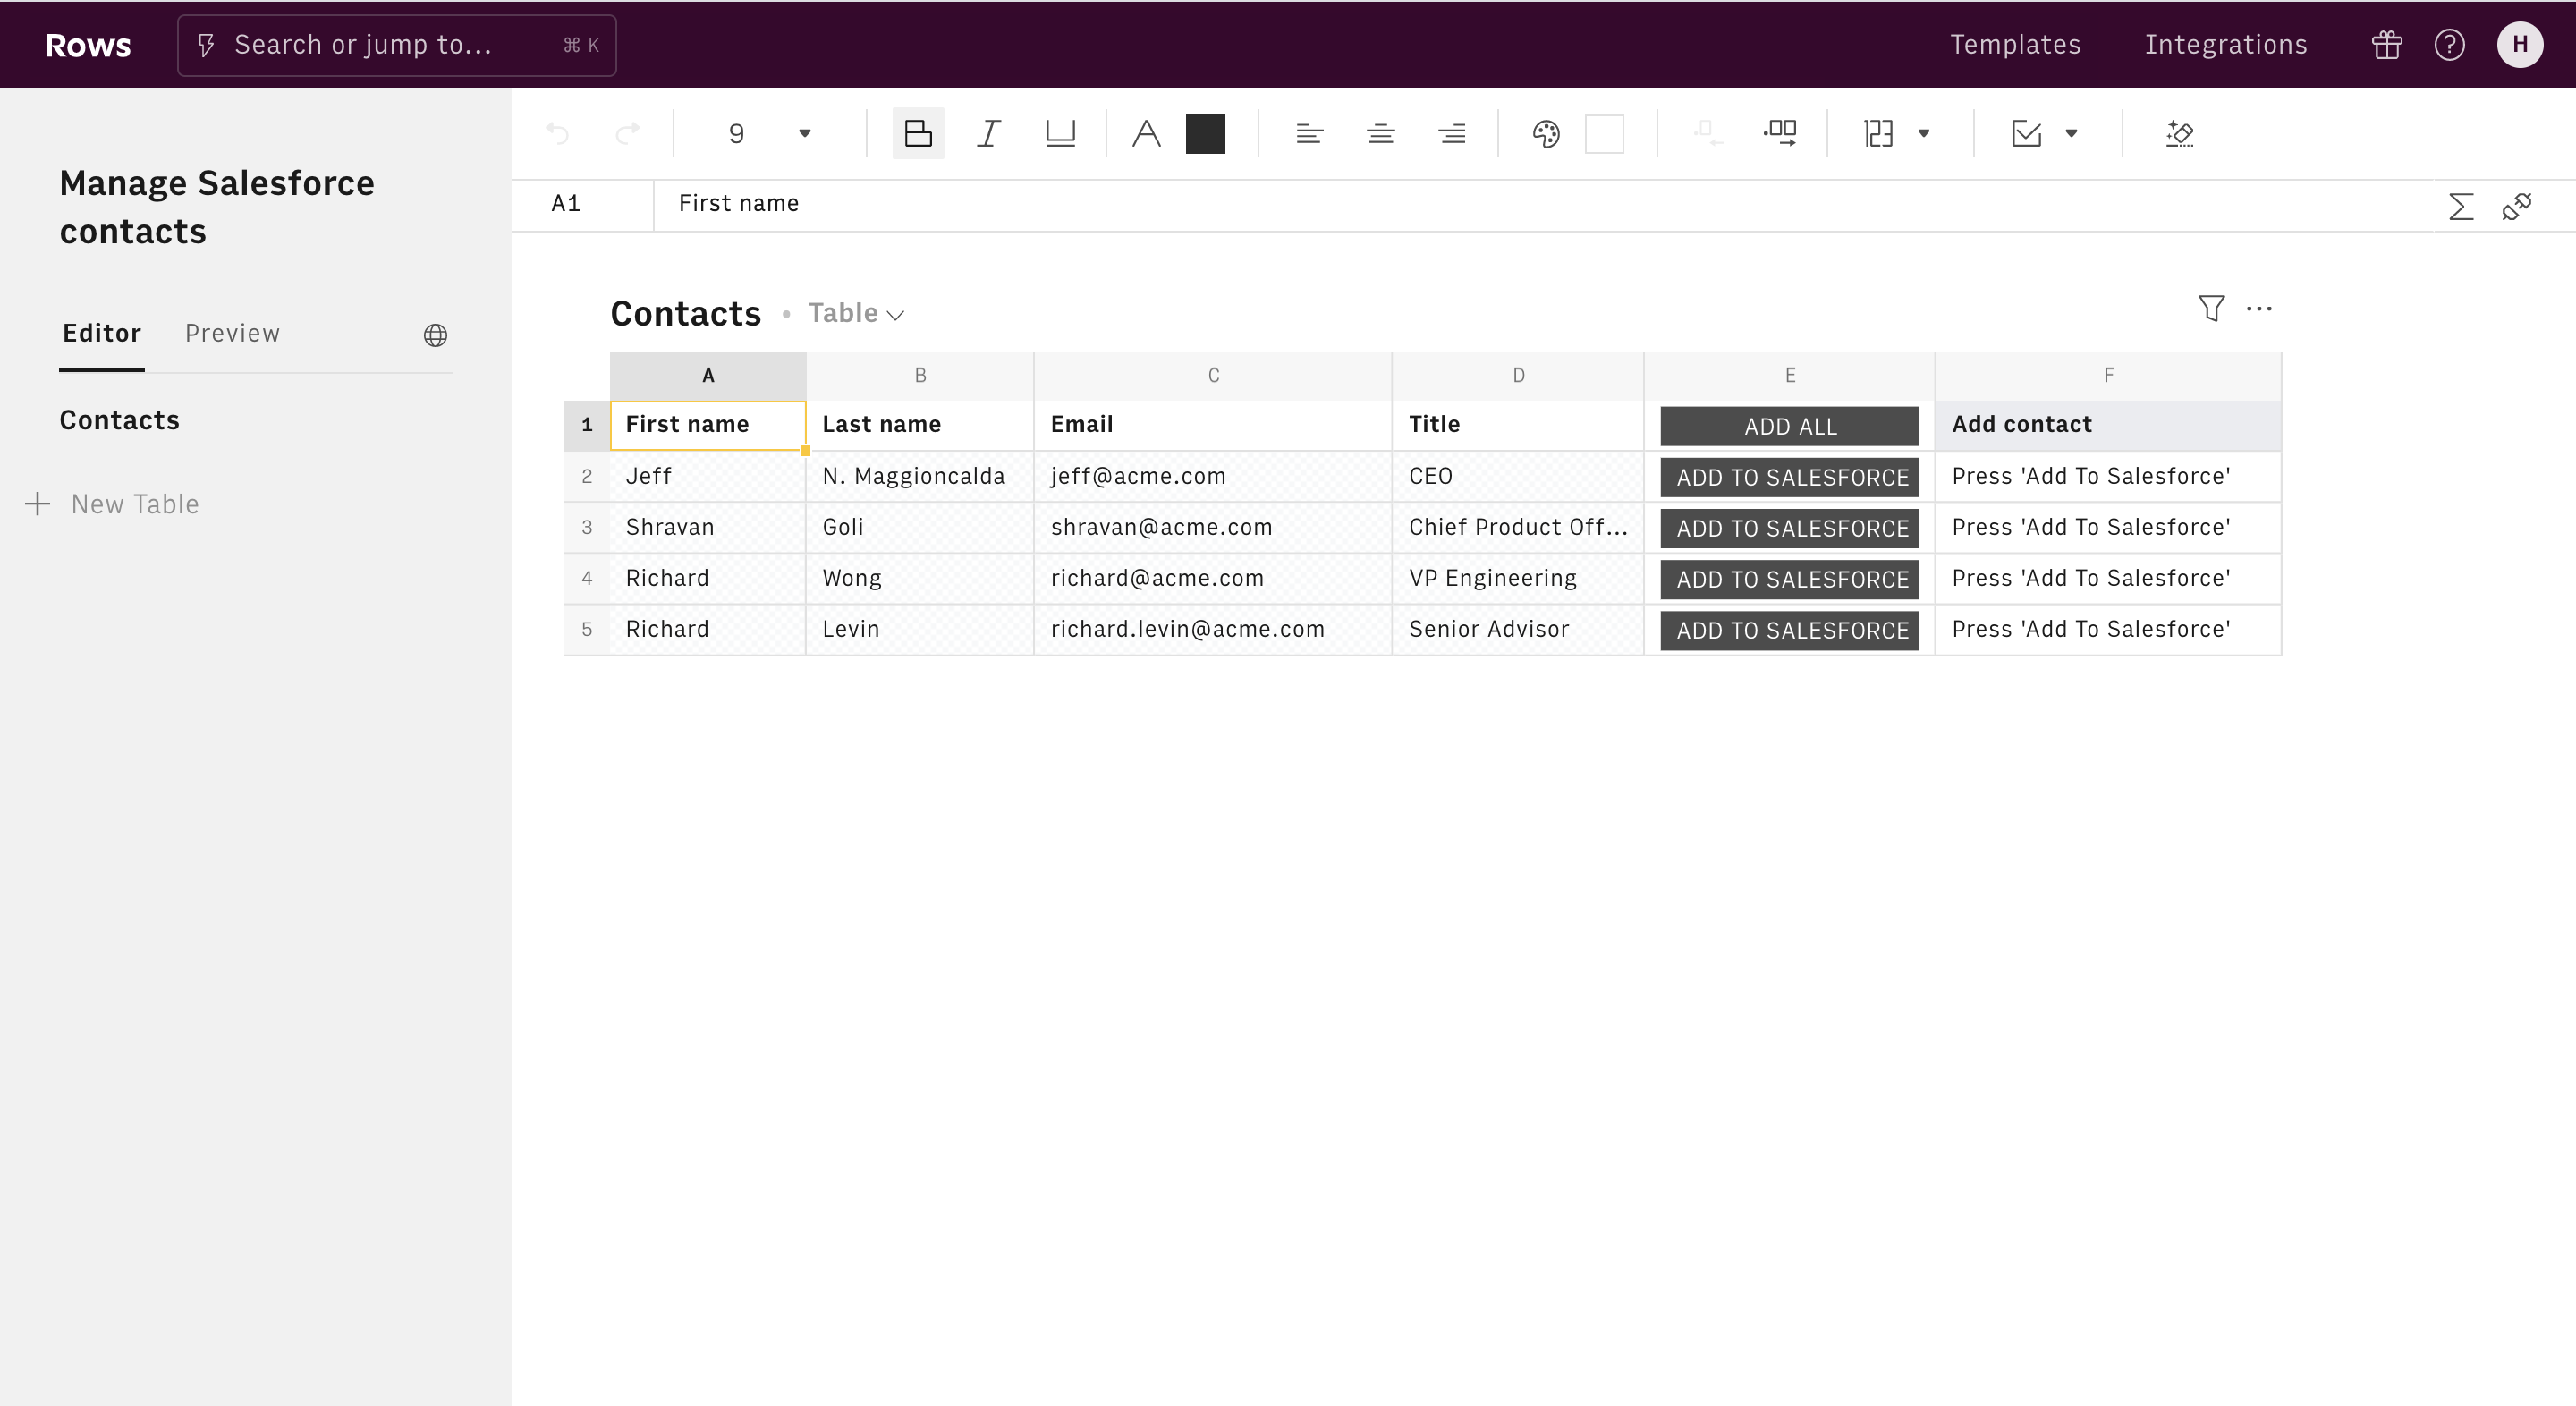 Manage Salesforce contacts editor 1